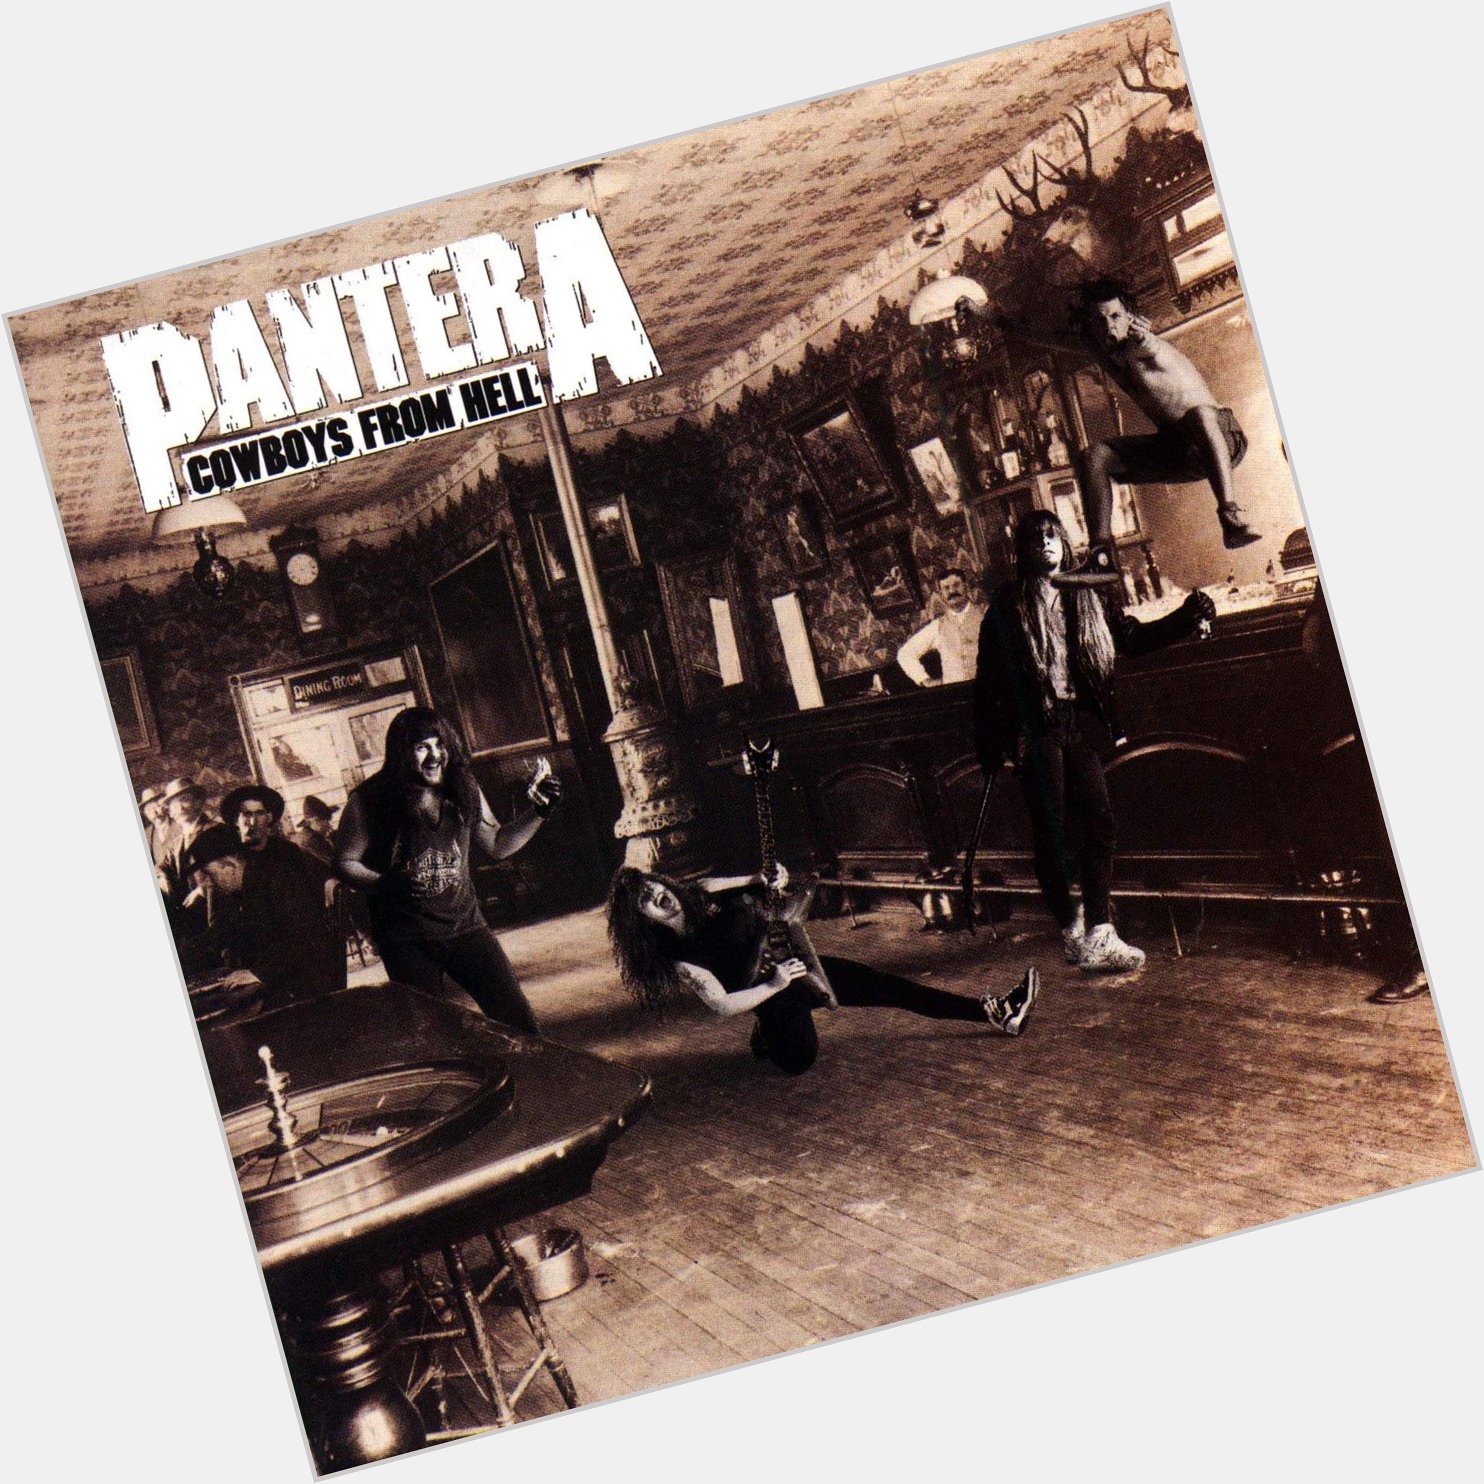  Cowboys From Hell
from Cowboys From Hell
by Pantera

Happy Birthday, Vinnie Paul 